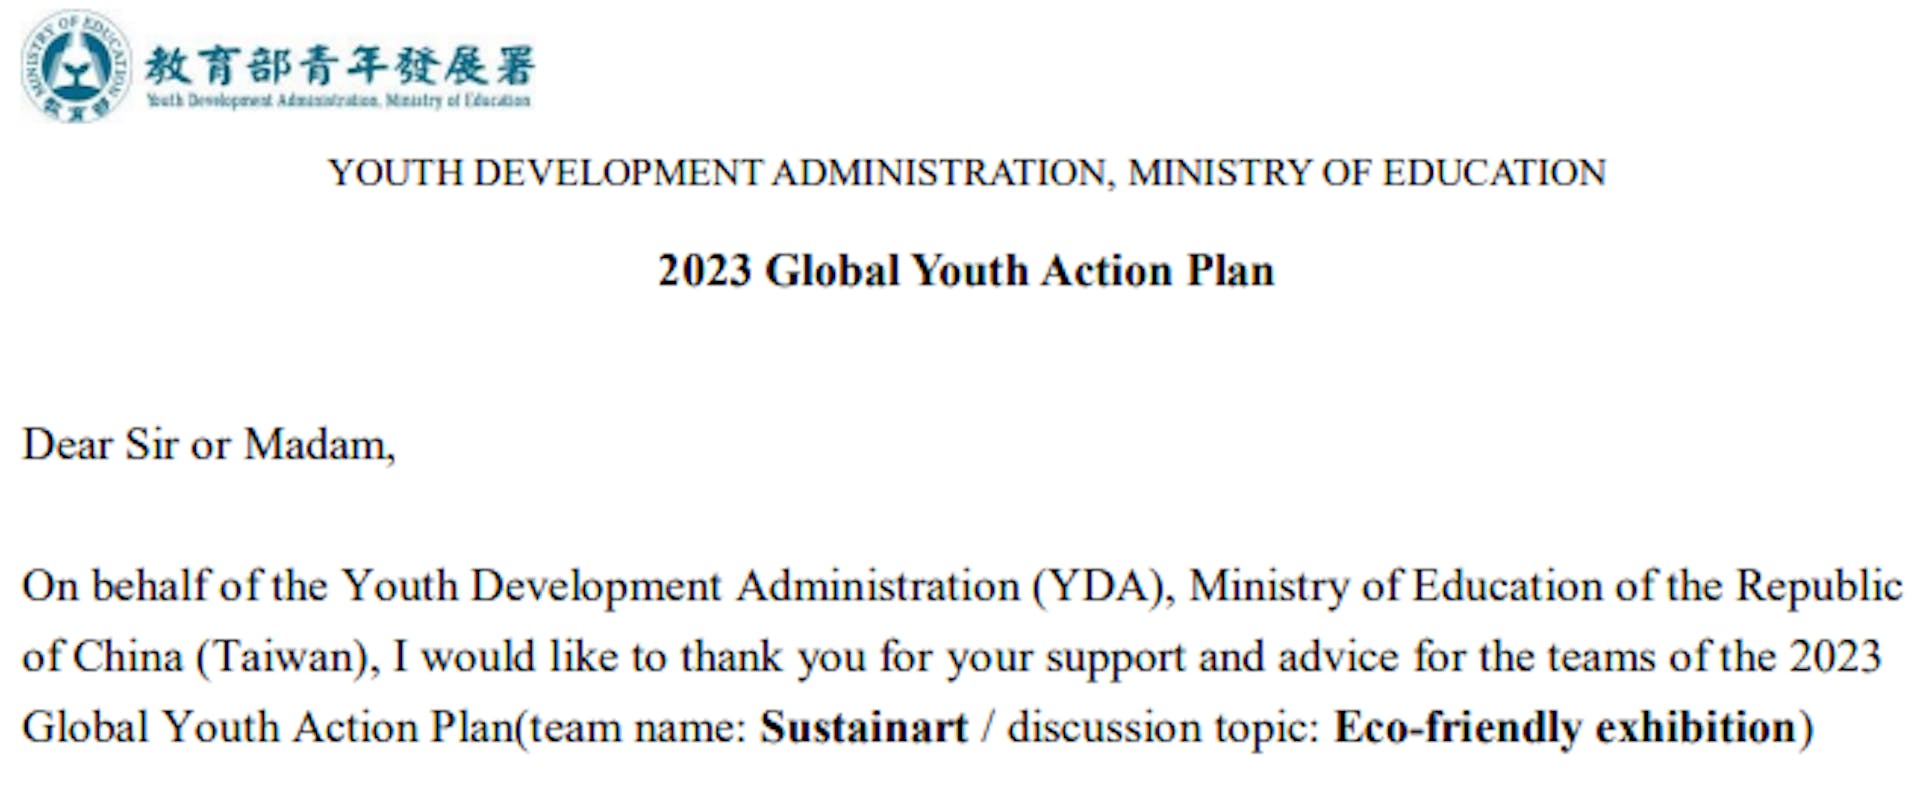 A letter from the Youth Development Administration of Taiwan